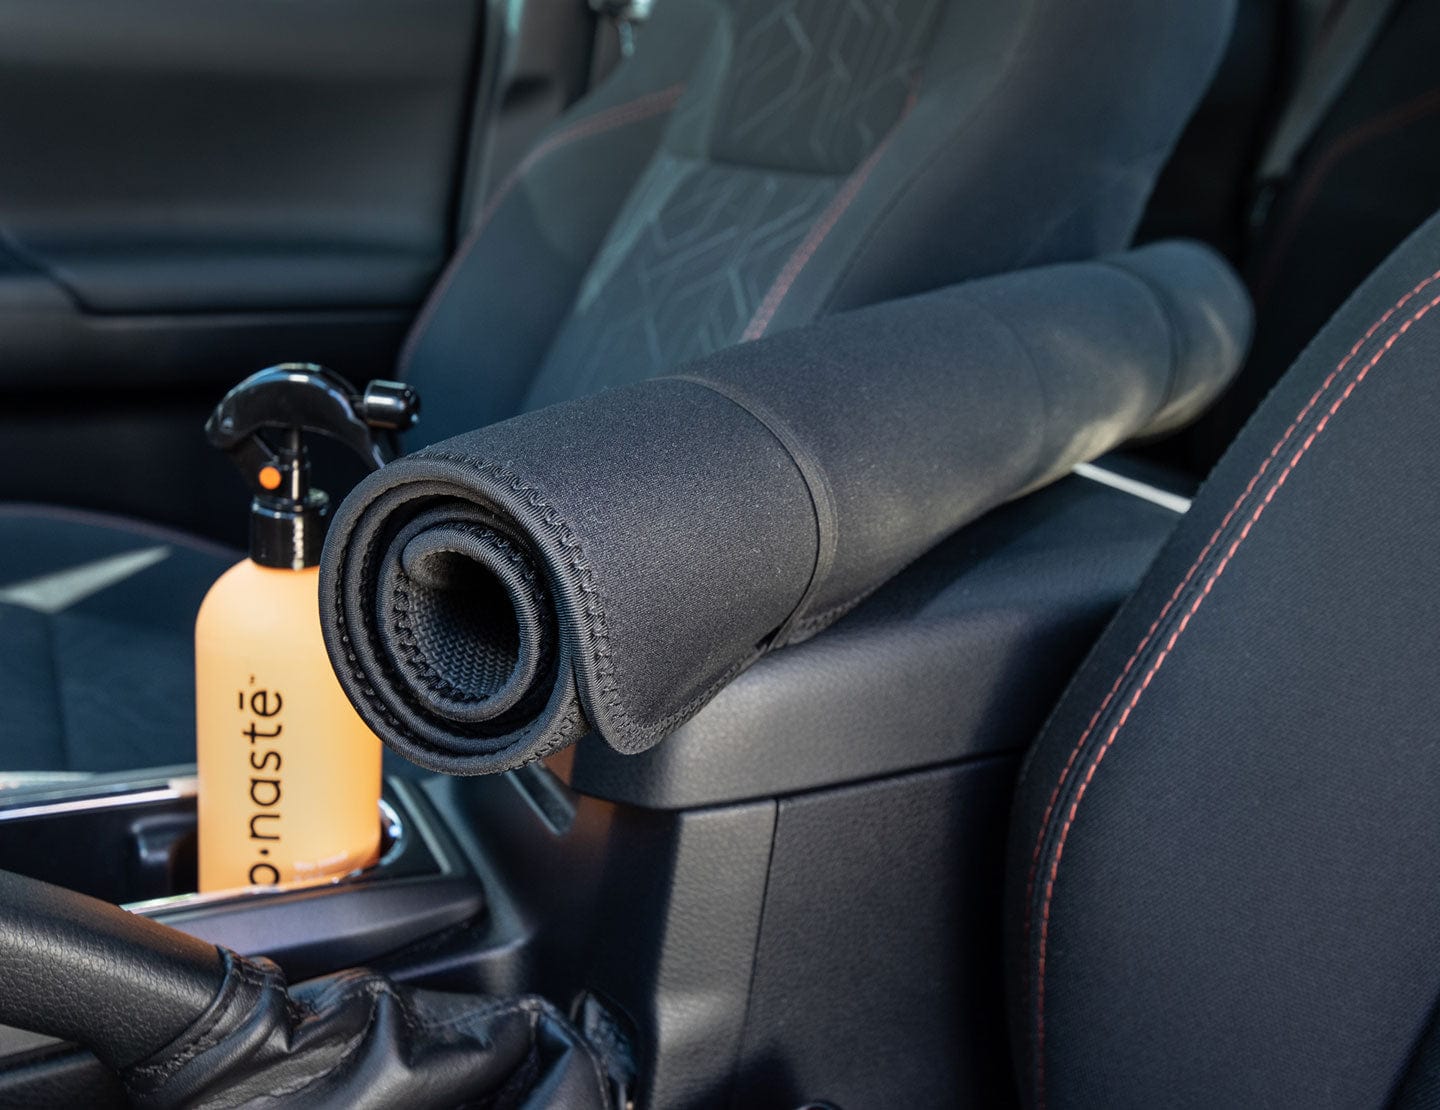 Seat protectors for the car: Protect your seats effectively!